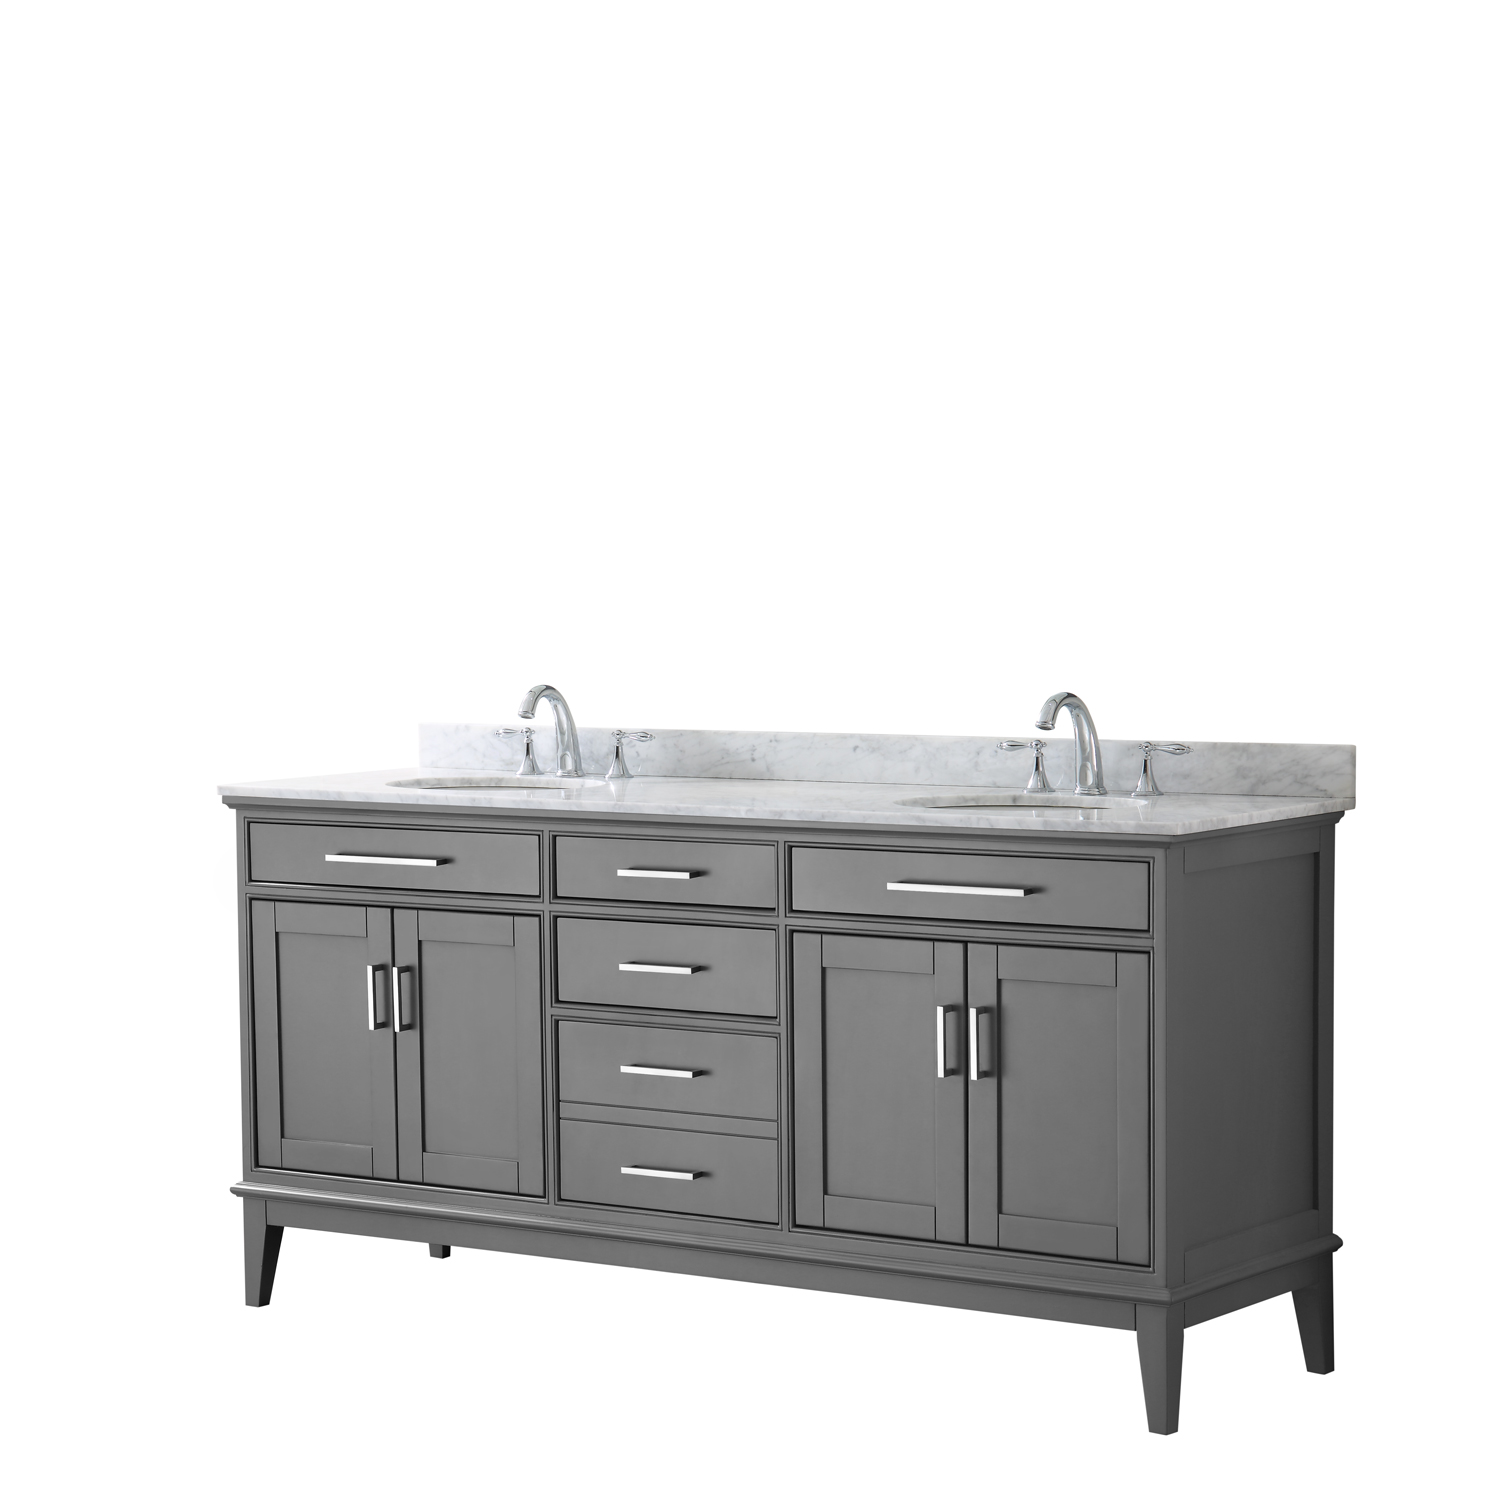 Contemporary 72" Double Bathroom Vanity in Dark Gray, White Carrara Marble Countertop with Undermount Sinks, and Mirror Options